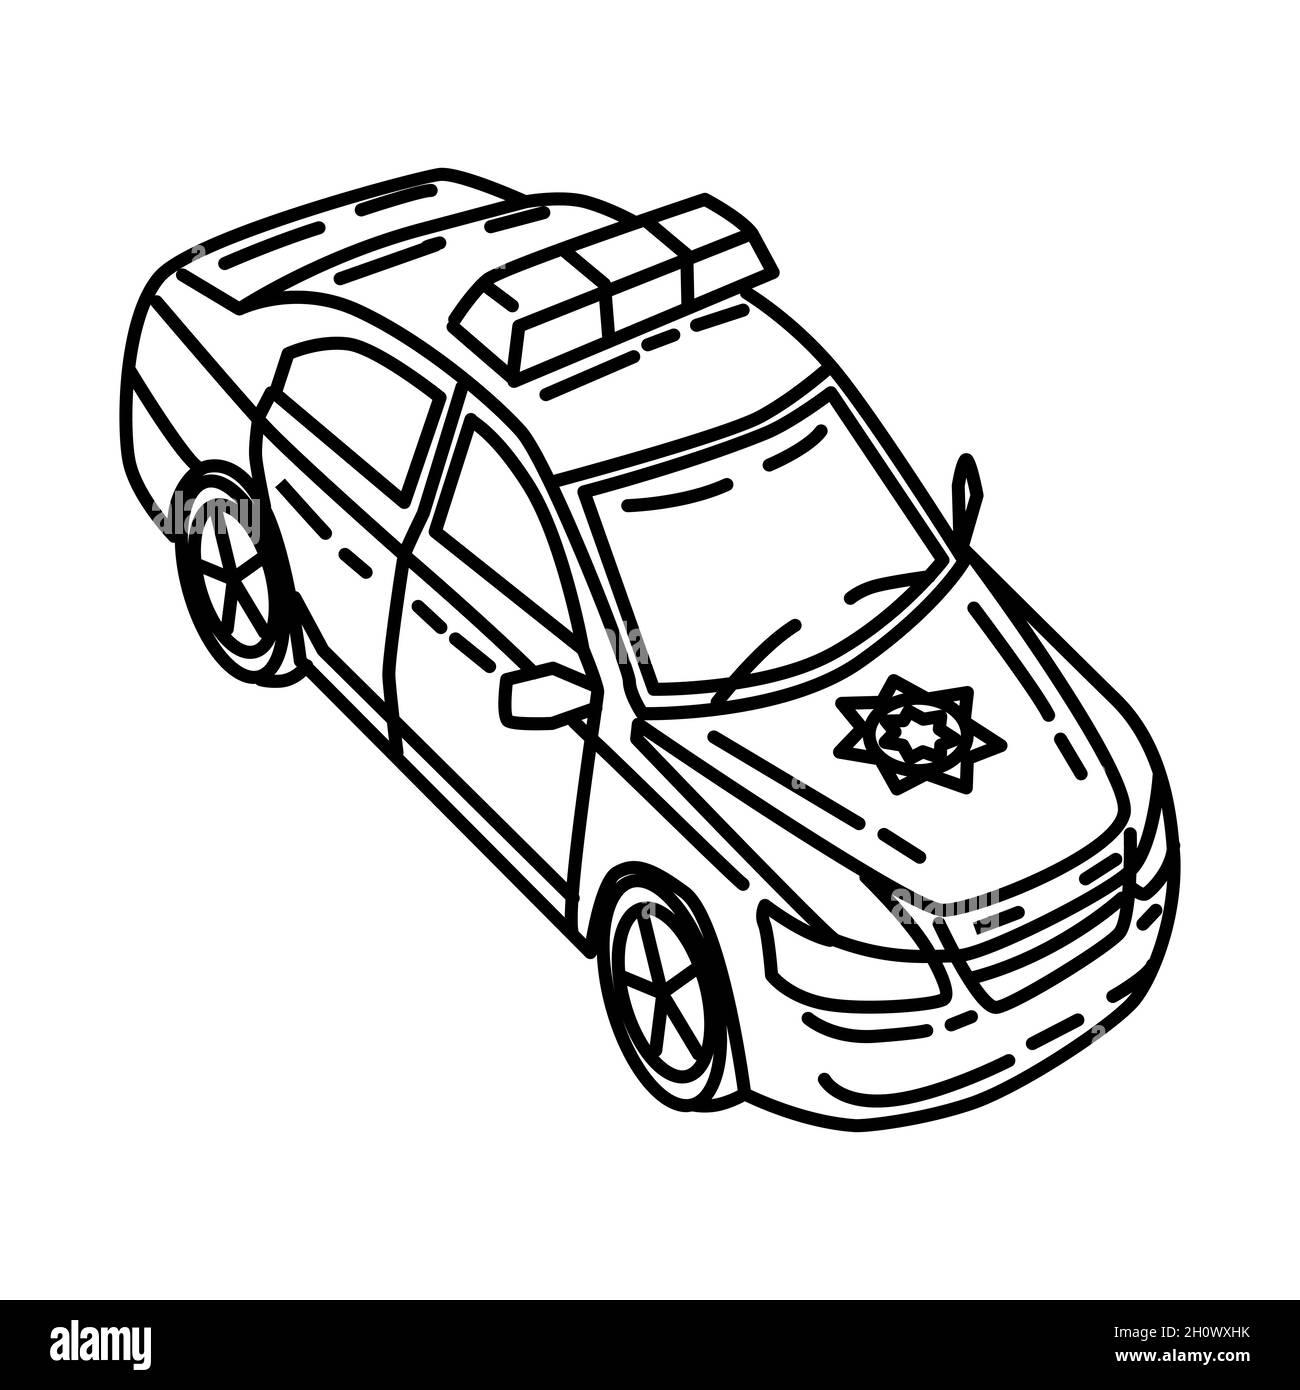 Police Officer Car Part of Police Equipment and Accessories Hand Drawn Icon Set Vector. Stock Vector